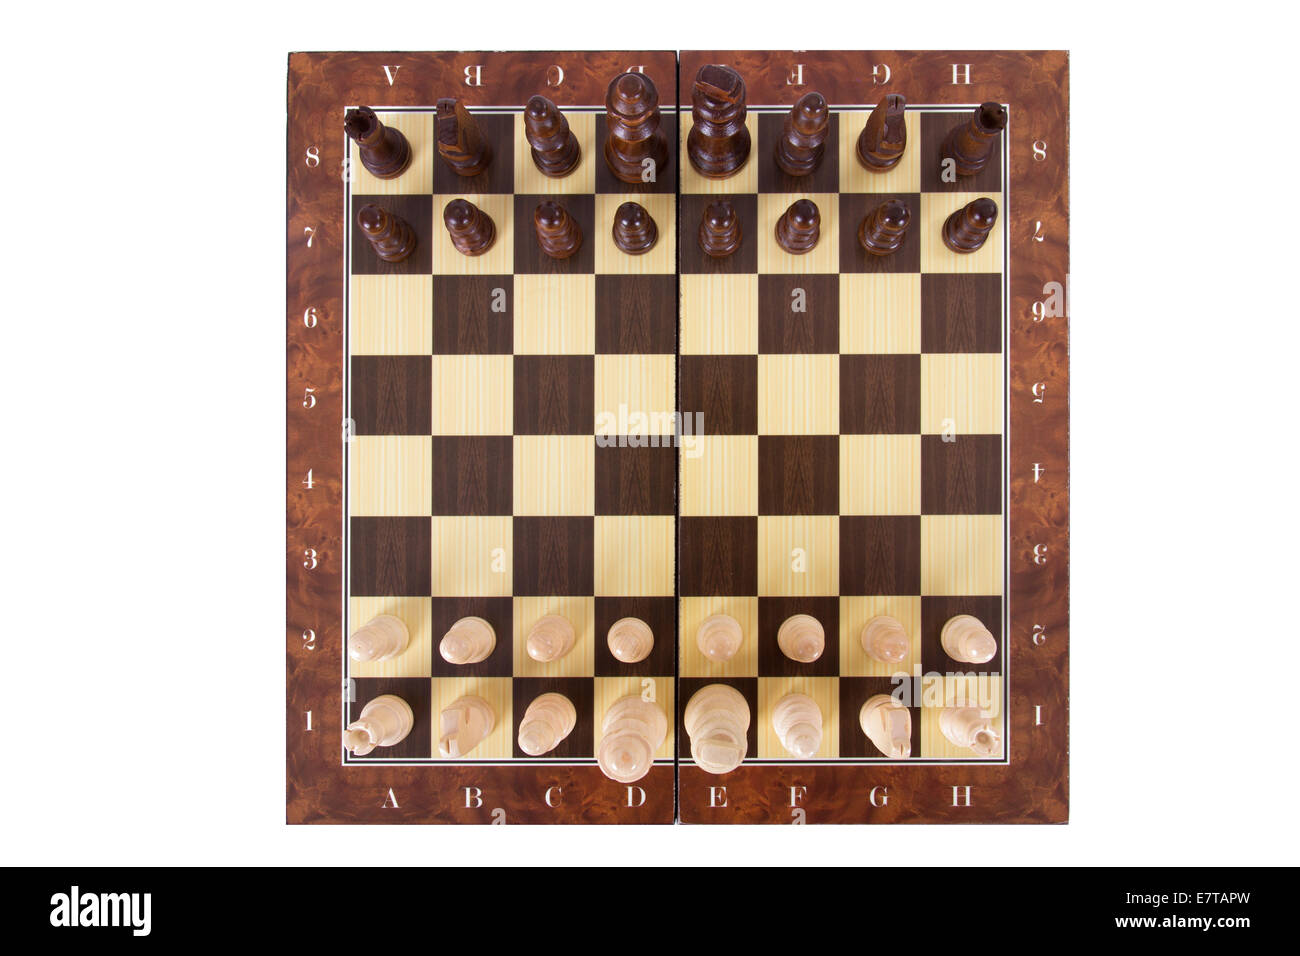 Chess board with starting positions aligned chess pieces, top view, isolated on white background. Stock Photo